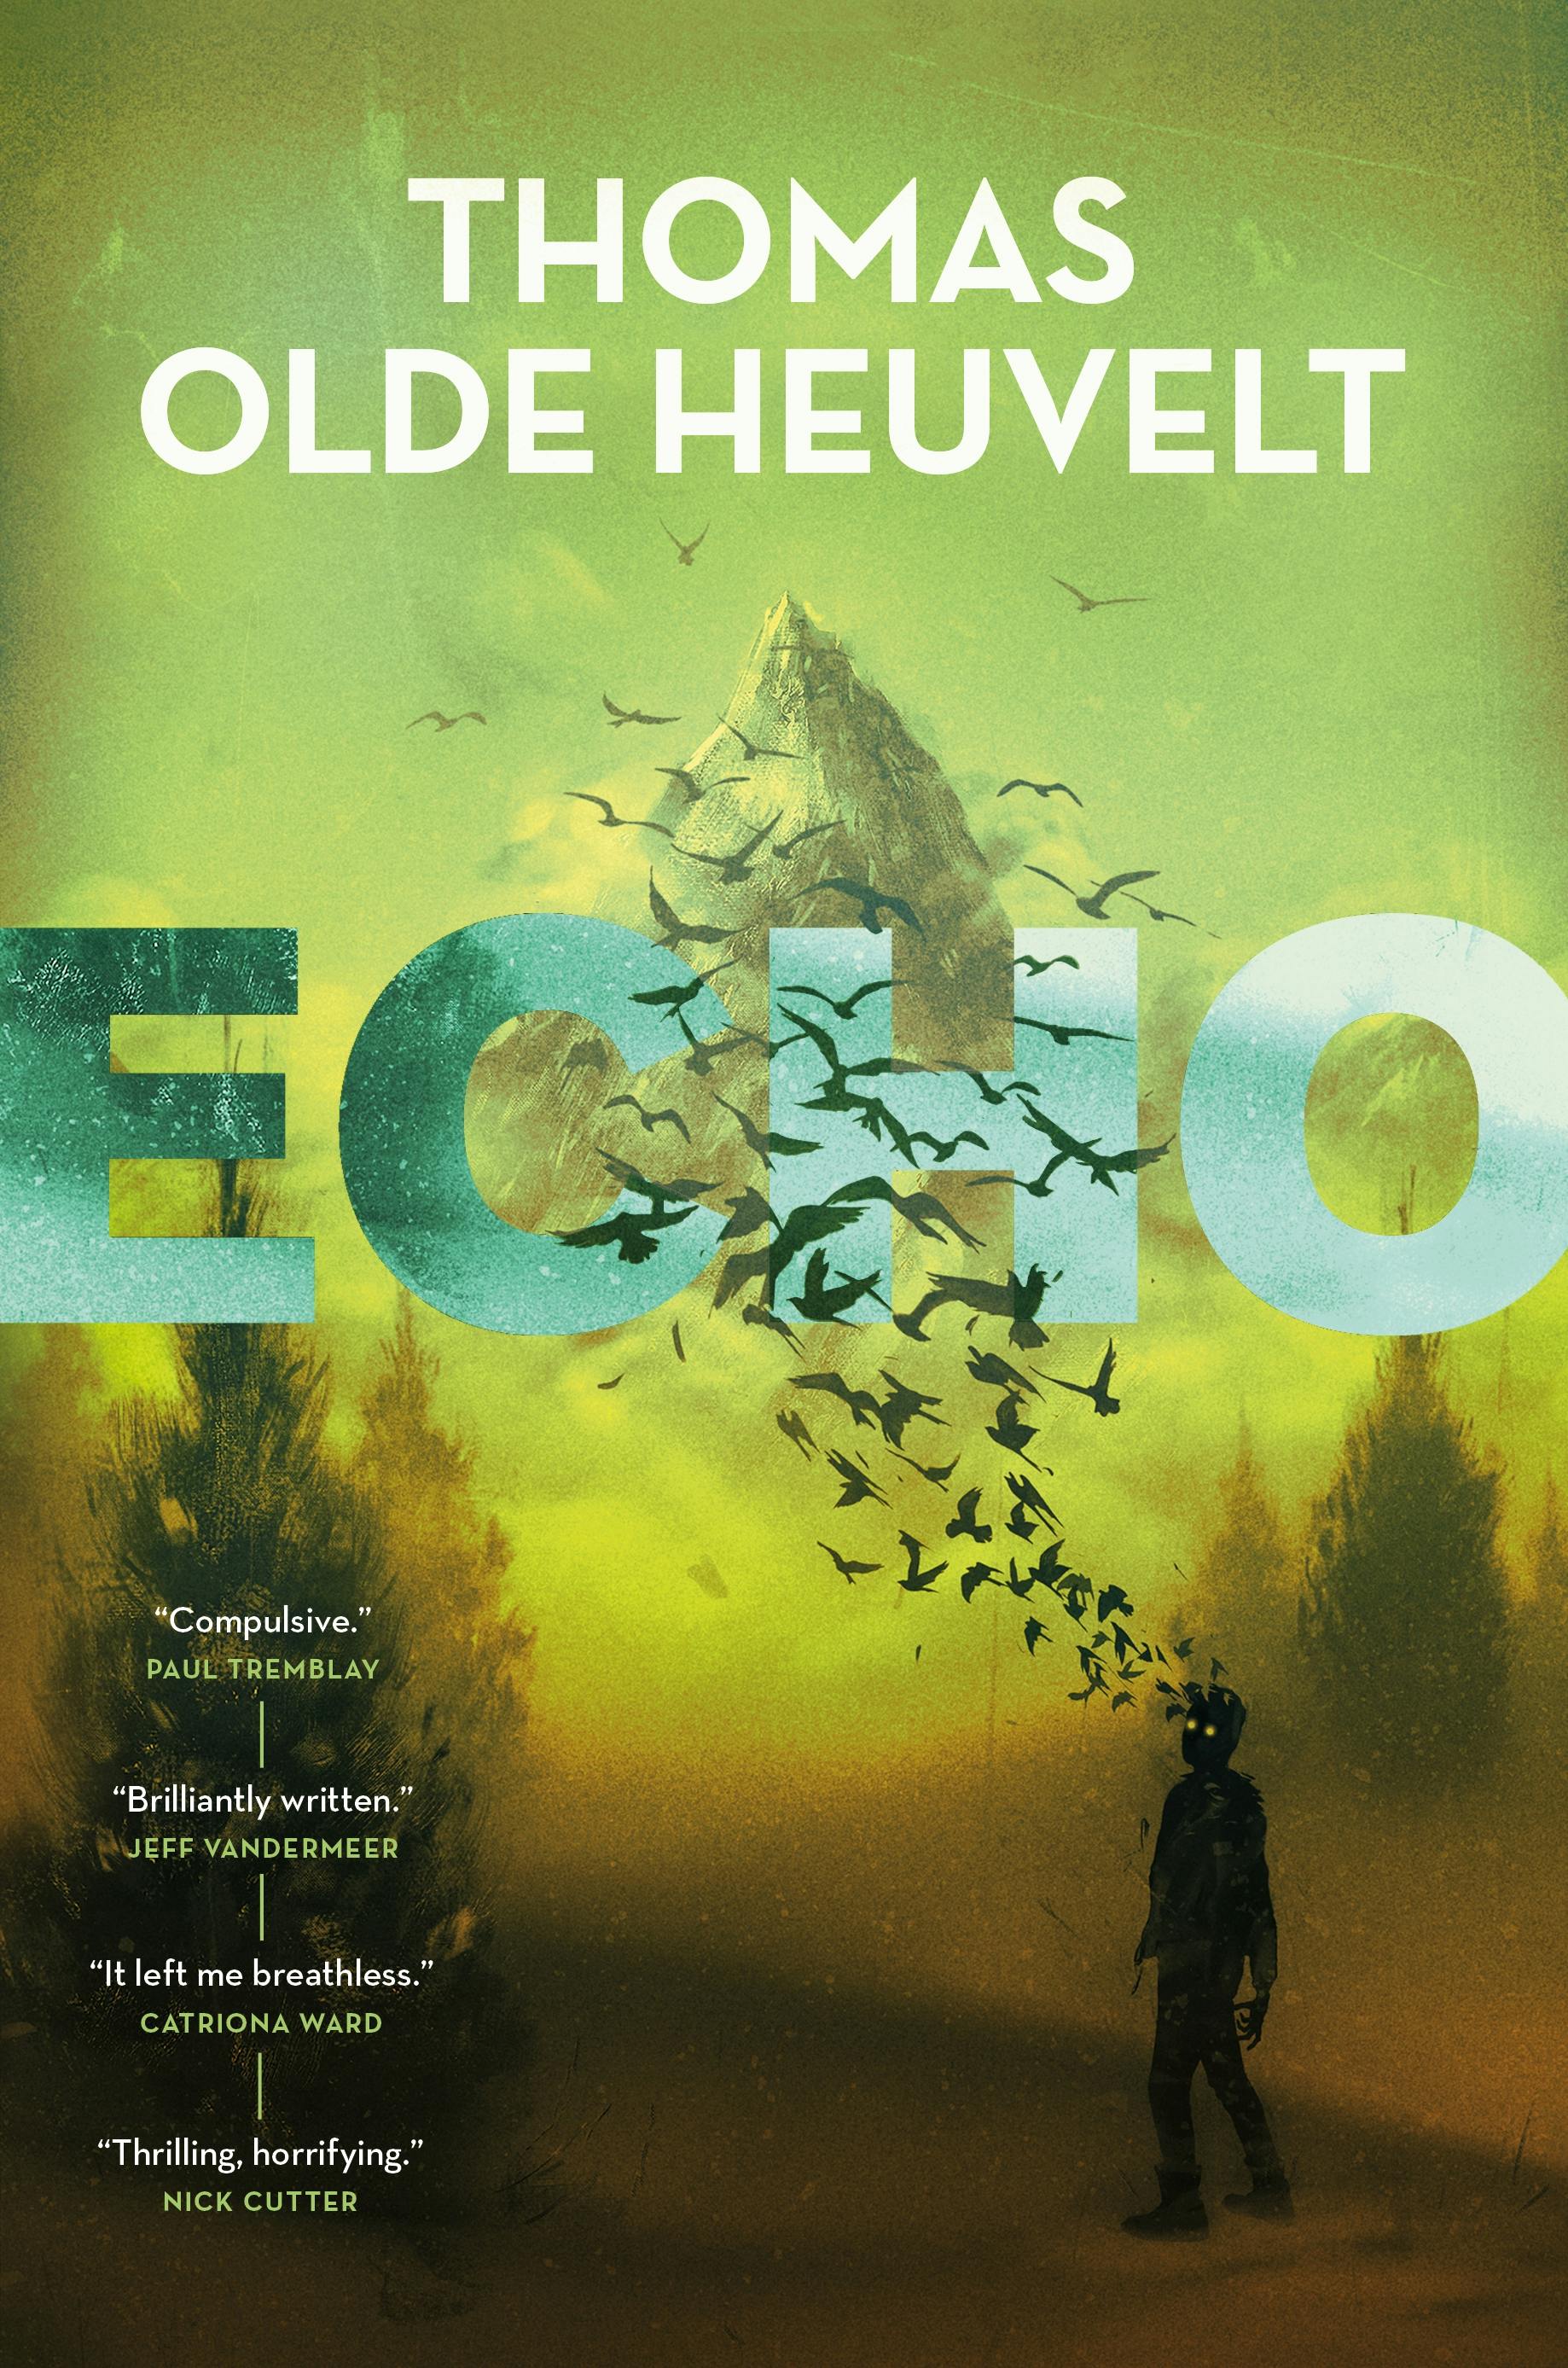 Cover for the book titled as: Echo